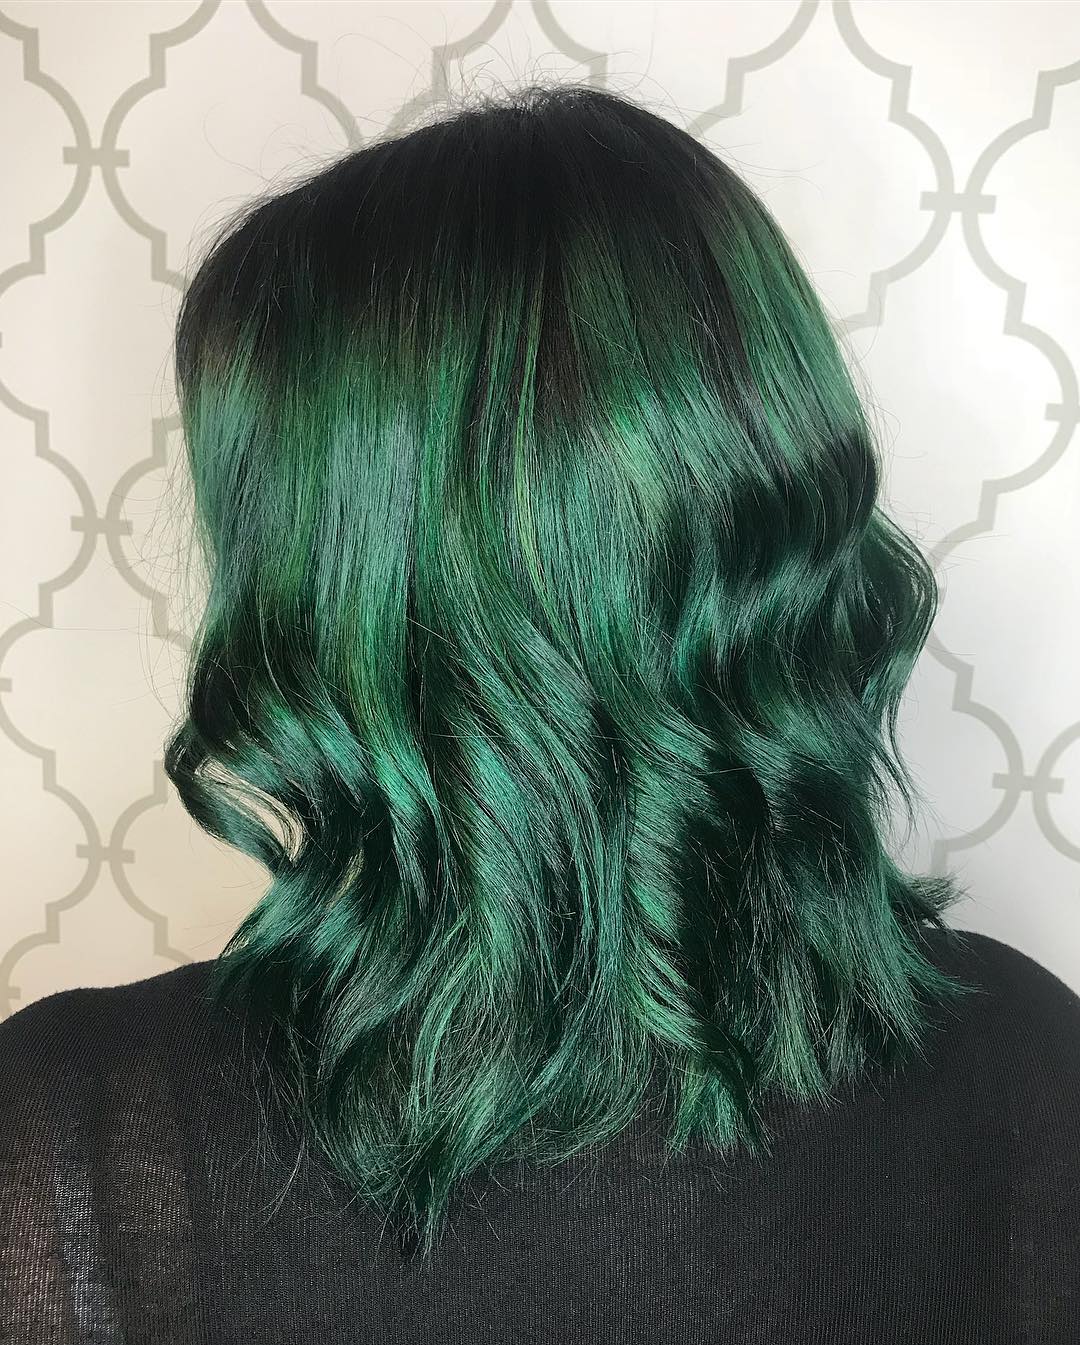 Hair color in an emerald green shade